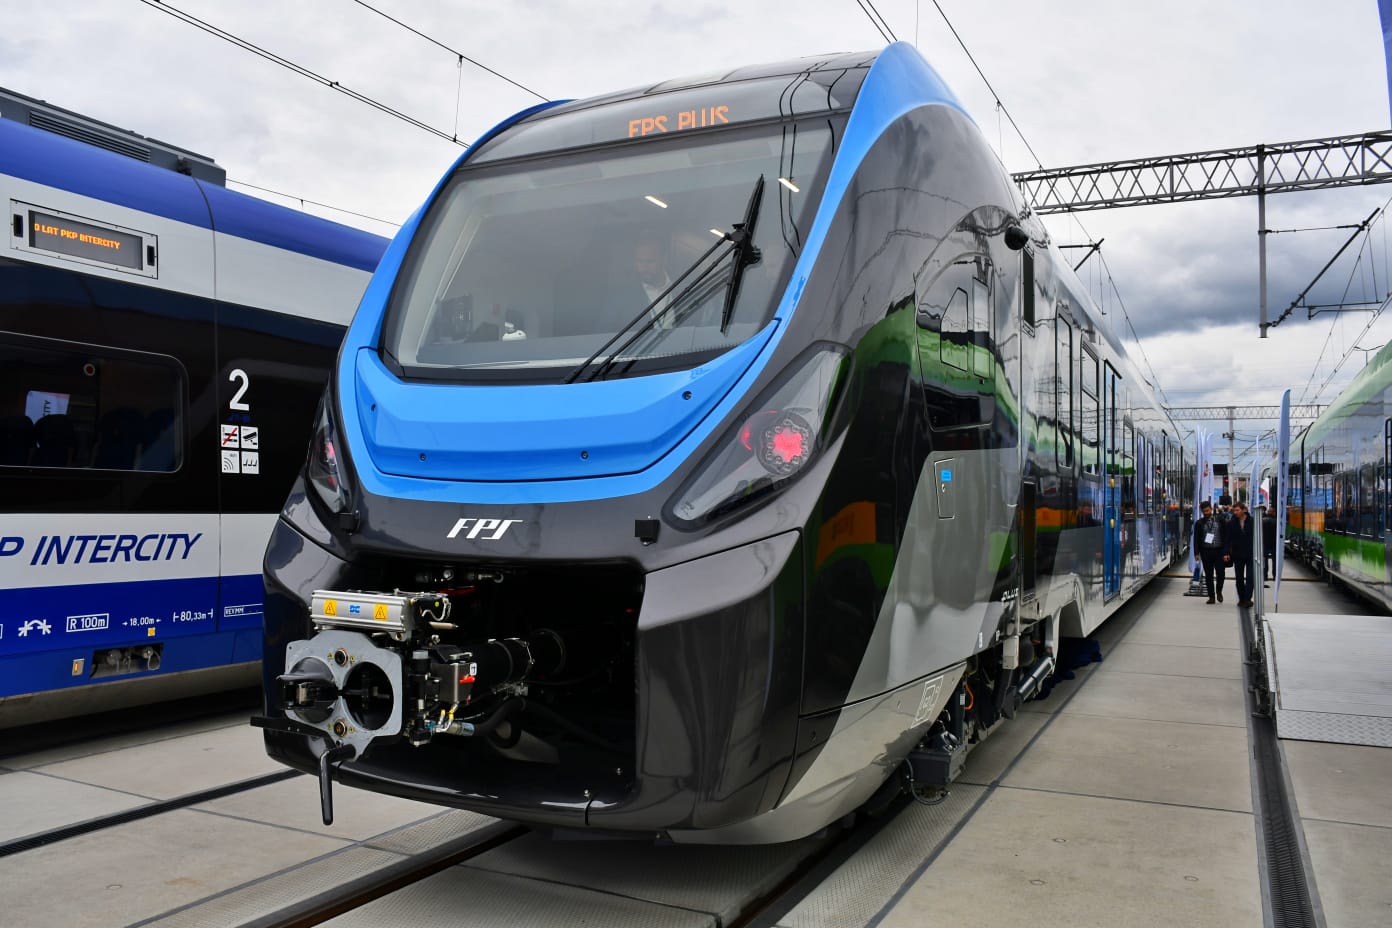 Presentation of the FPS Plus hybrid train at the TRAKO exhibition in Gdansk, 2021